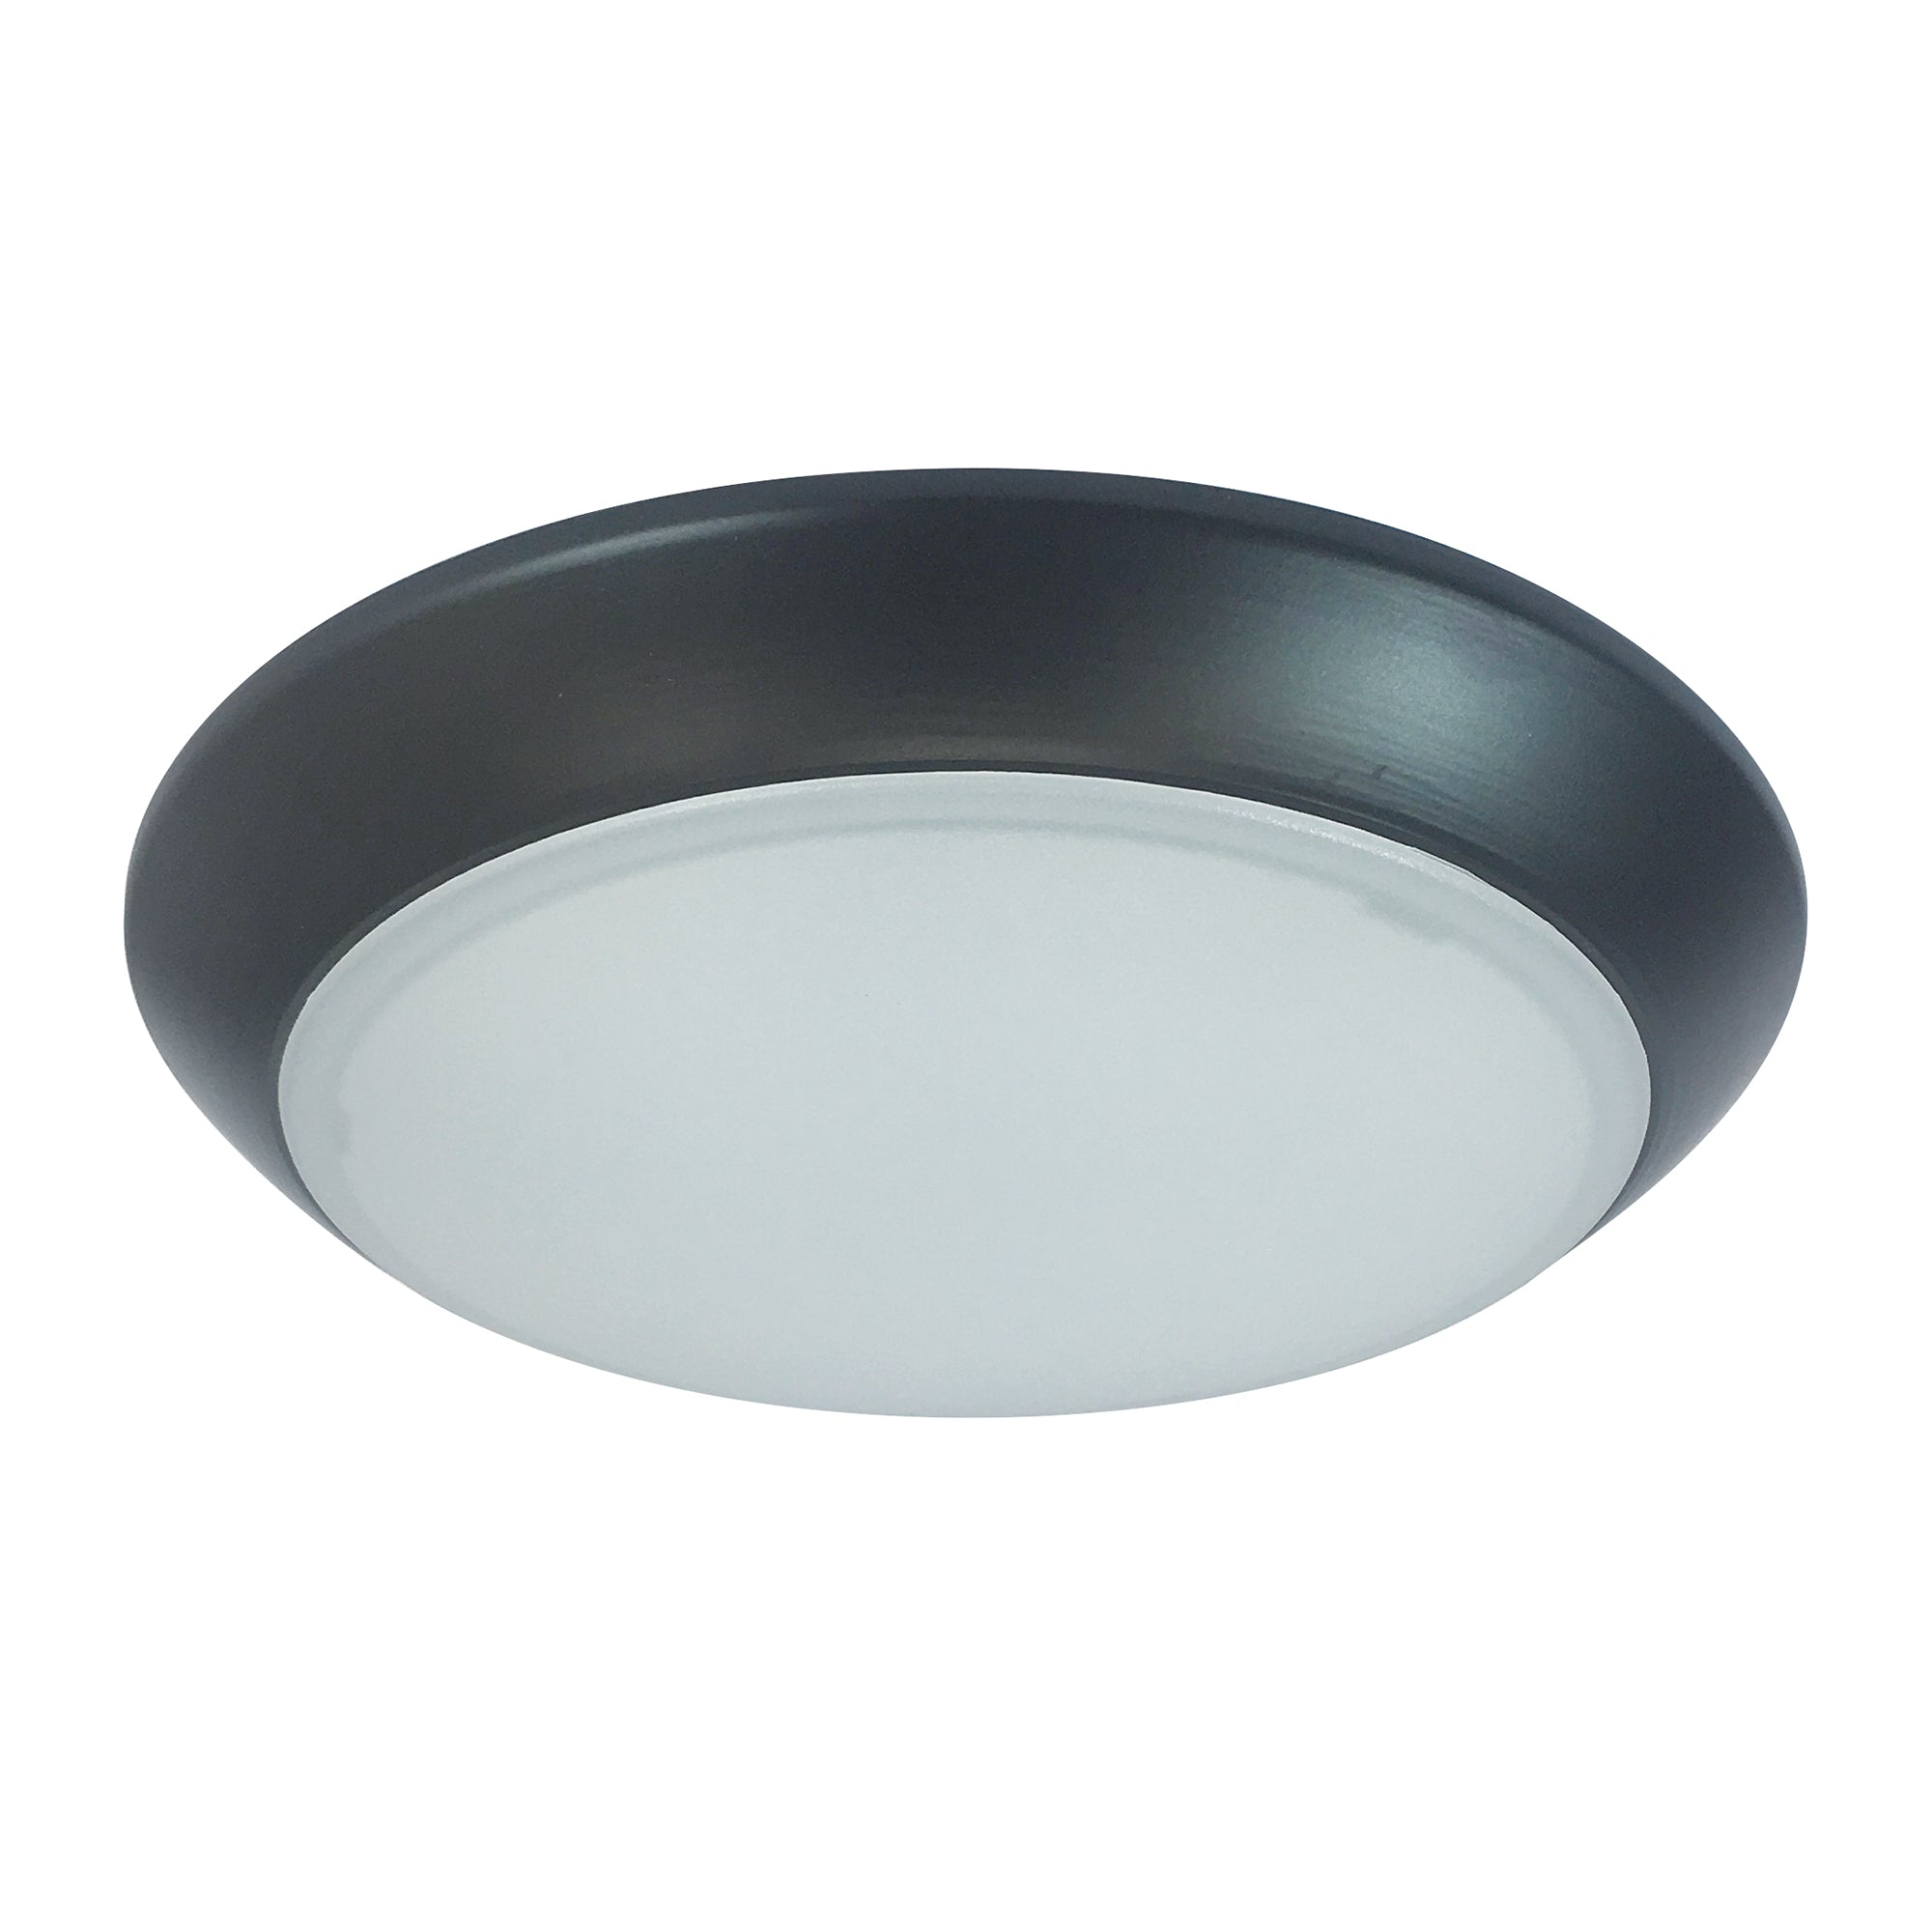 Nora Lighting NLOPAC-R8T2450BZ - Surface - 8 Inch AC Opal LED Surface Mount, 2150lm / 32W, 5000K, Bronze finish